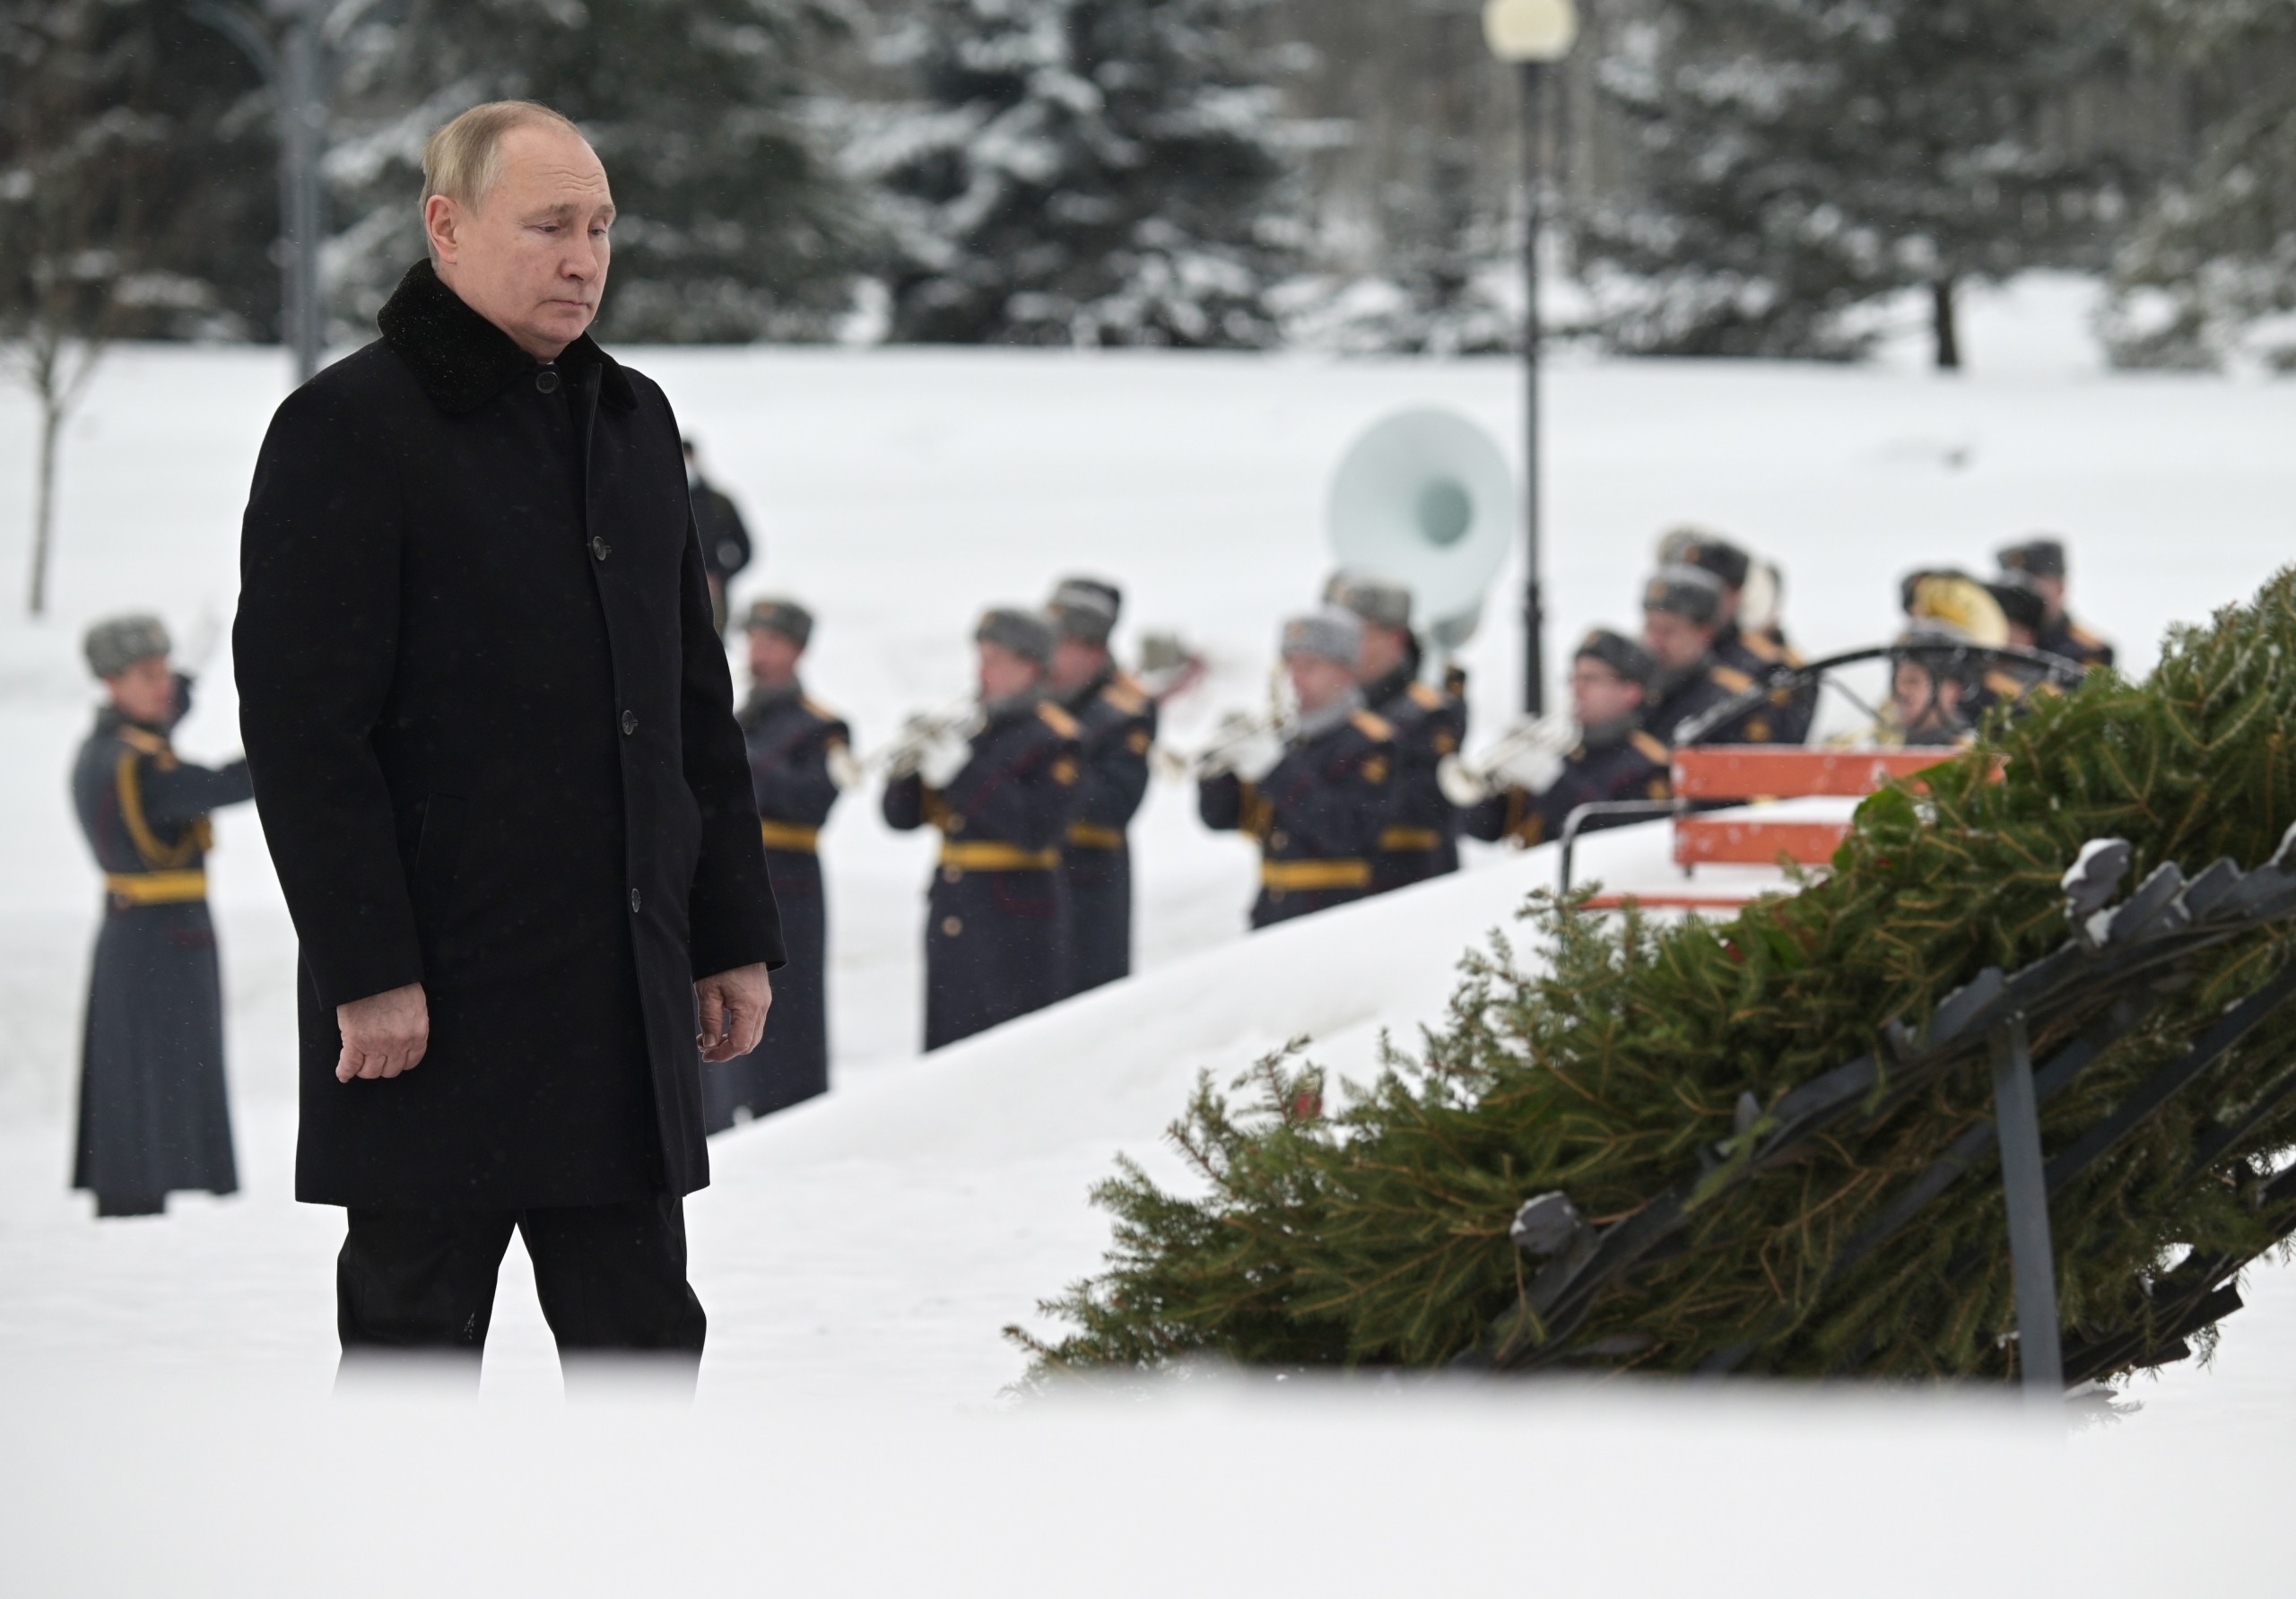 epa09712150 Russian President Vladimir Putin lays flowers at the Piskaryovskoye Memorial Cemetery to mark the 78th anniversary since Leningrad siege was lifted during the World War II, in St. Petersburg, Russia, 27 January 2022. Up to 700,000 civilians are believed to have died from hunger, frost, shelling and air bombardment during the siege of Leningrad by Nazi German army that lasted some 900 days during the World War II.  EPA/ALEKSEY NIKOLSKYI / SPUTNIK / KREMLIN POOL MANDATORY CREDIT